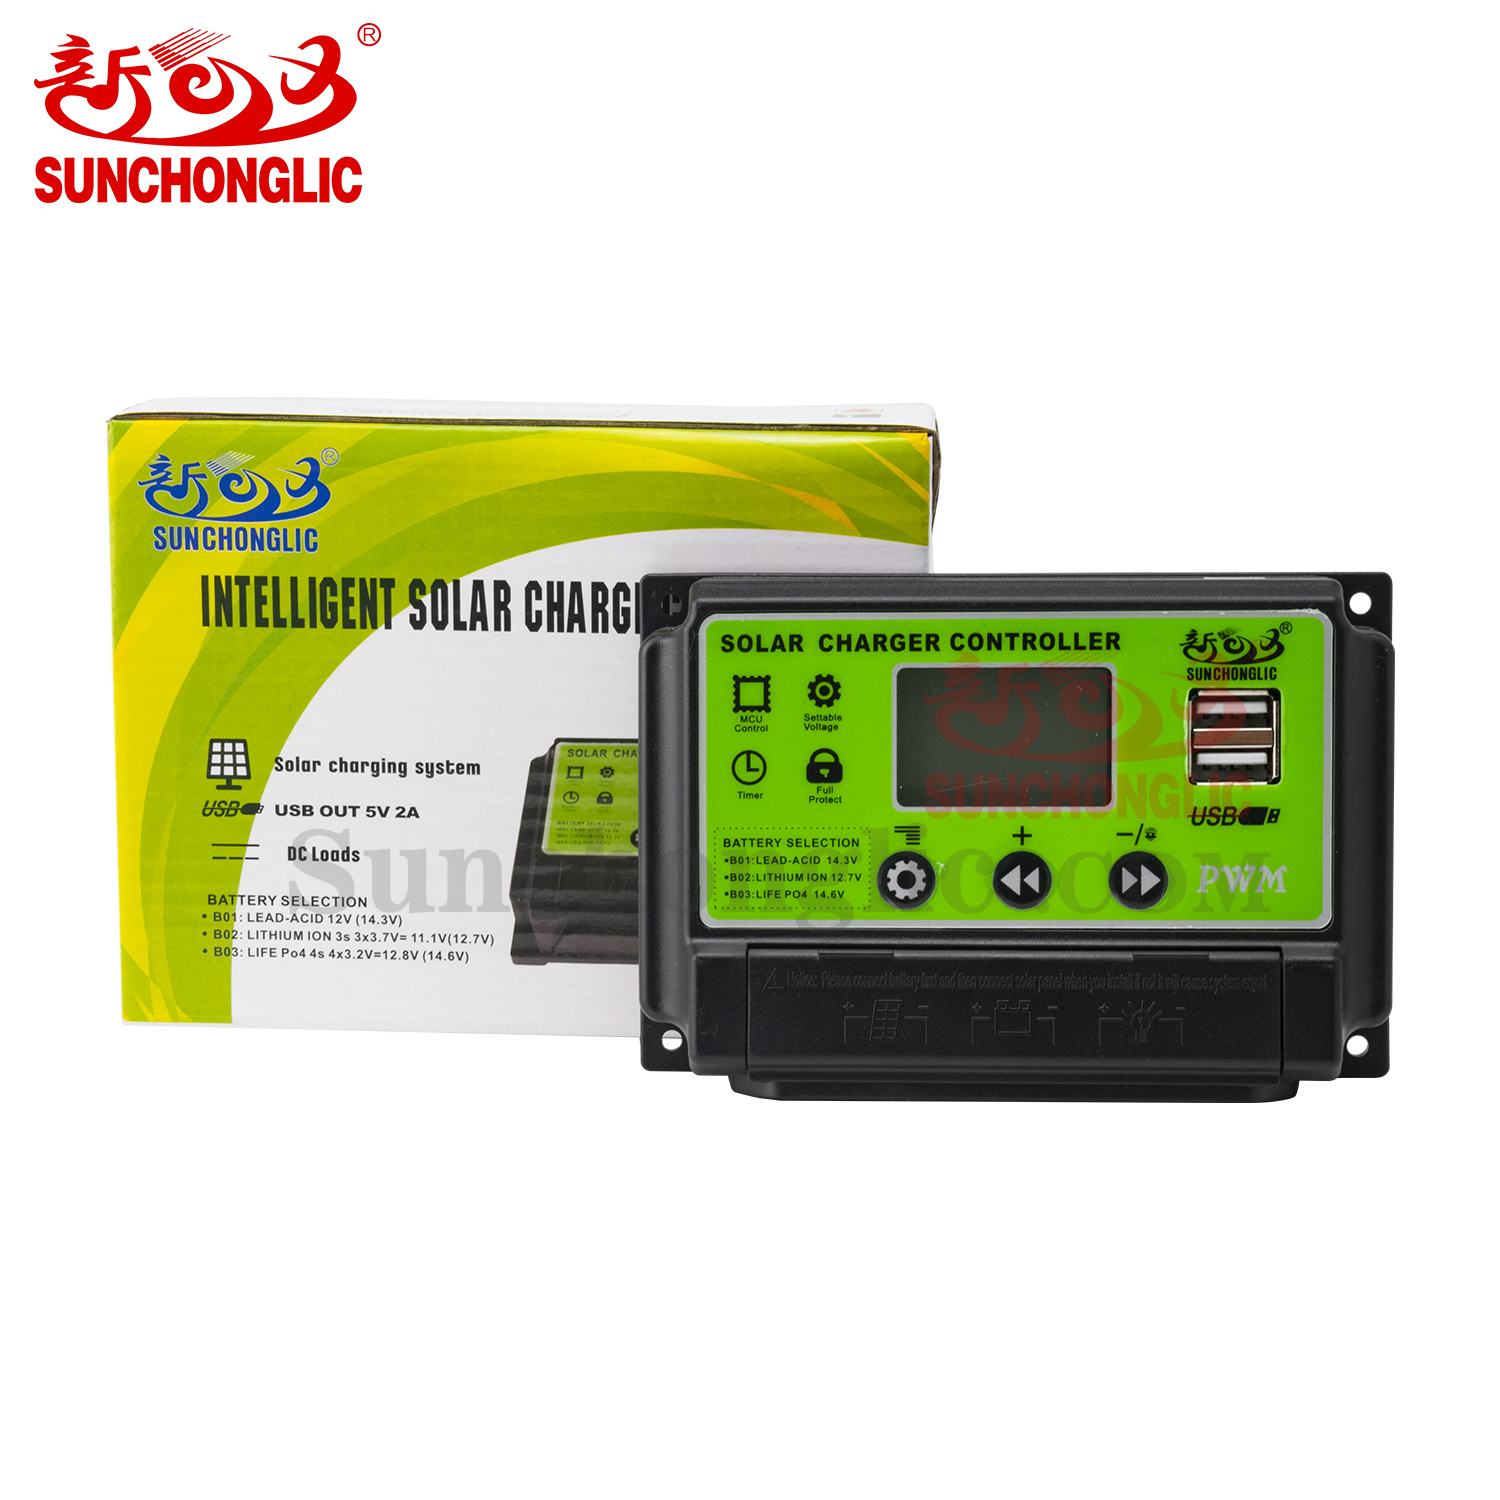 PWM Solar Charge Controller - FT-S1230